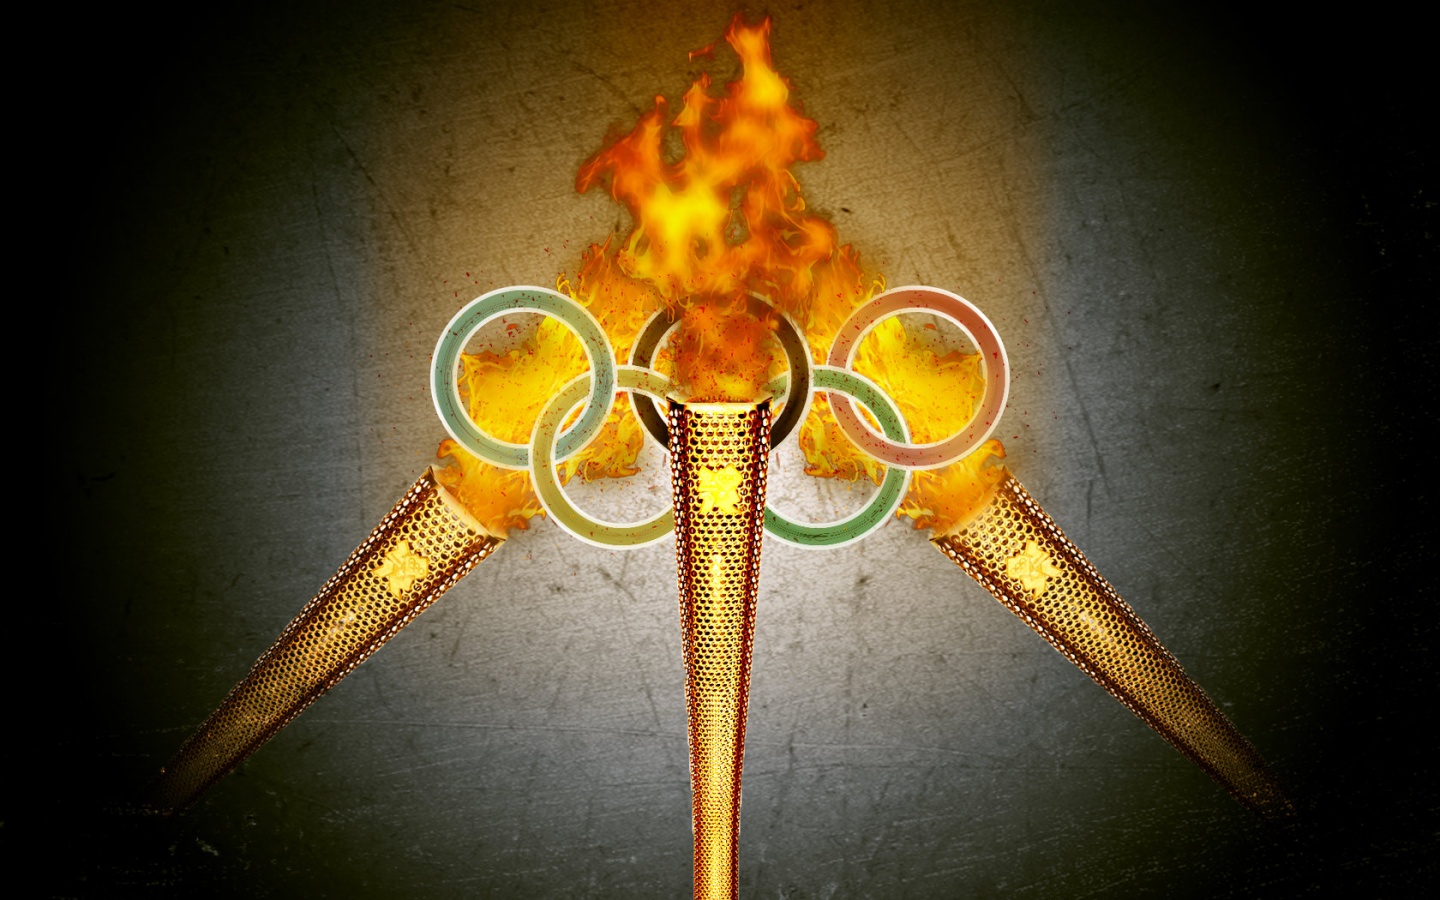 Olympic Torches Windows 8 Wallpaper Windows 8 Torch Flames